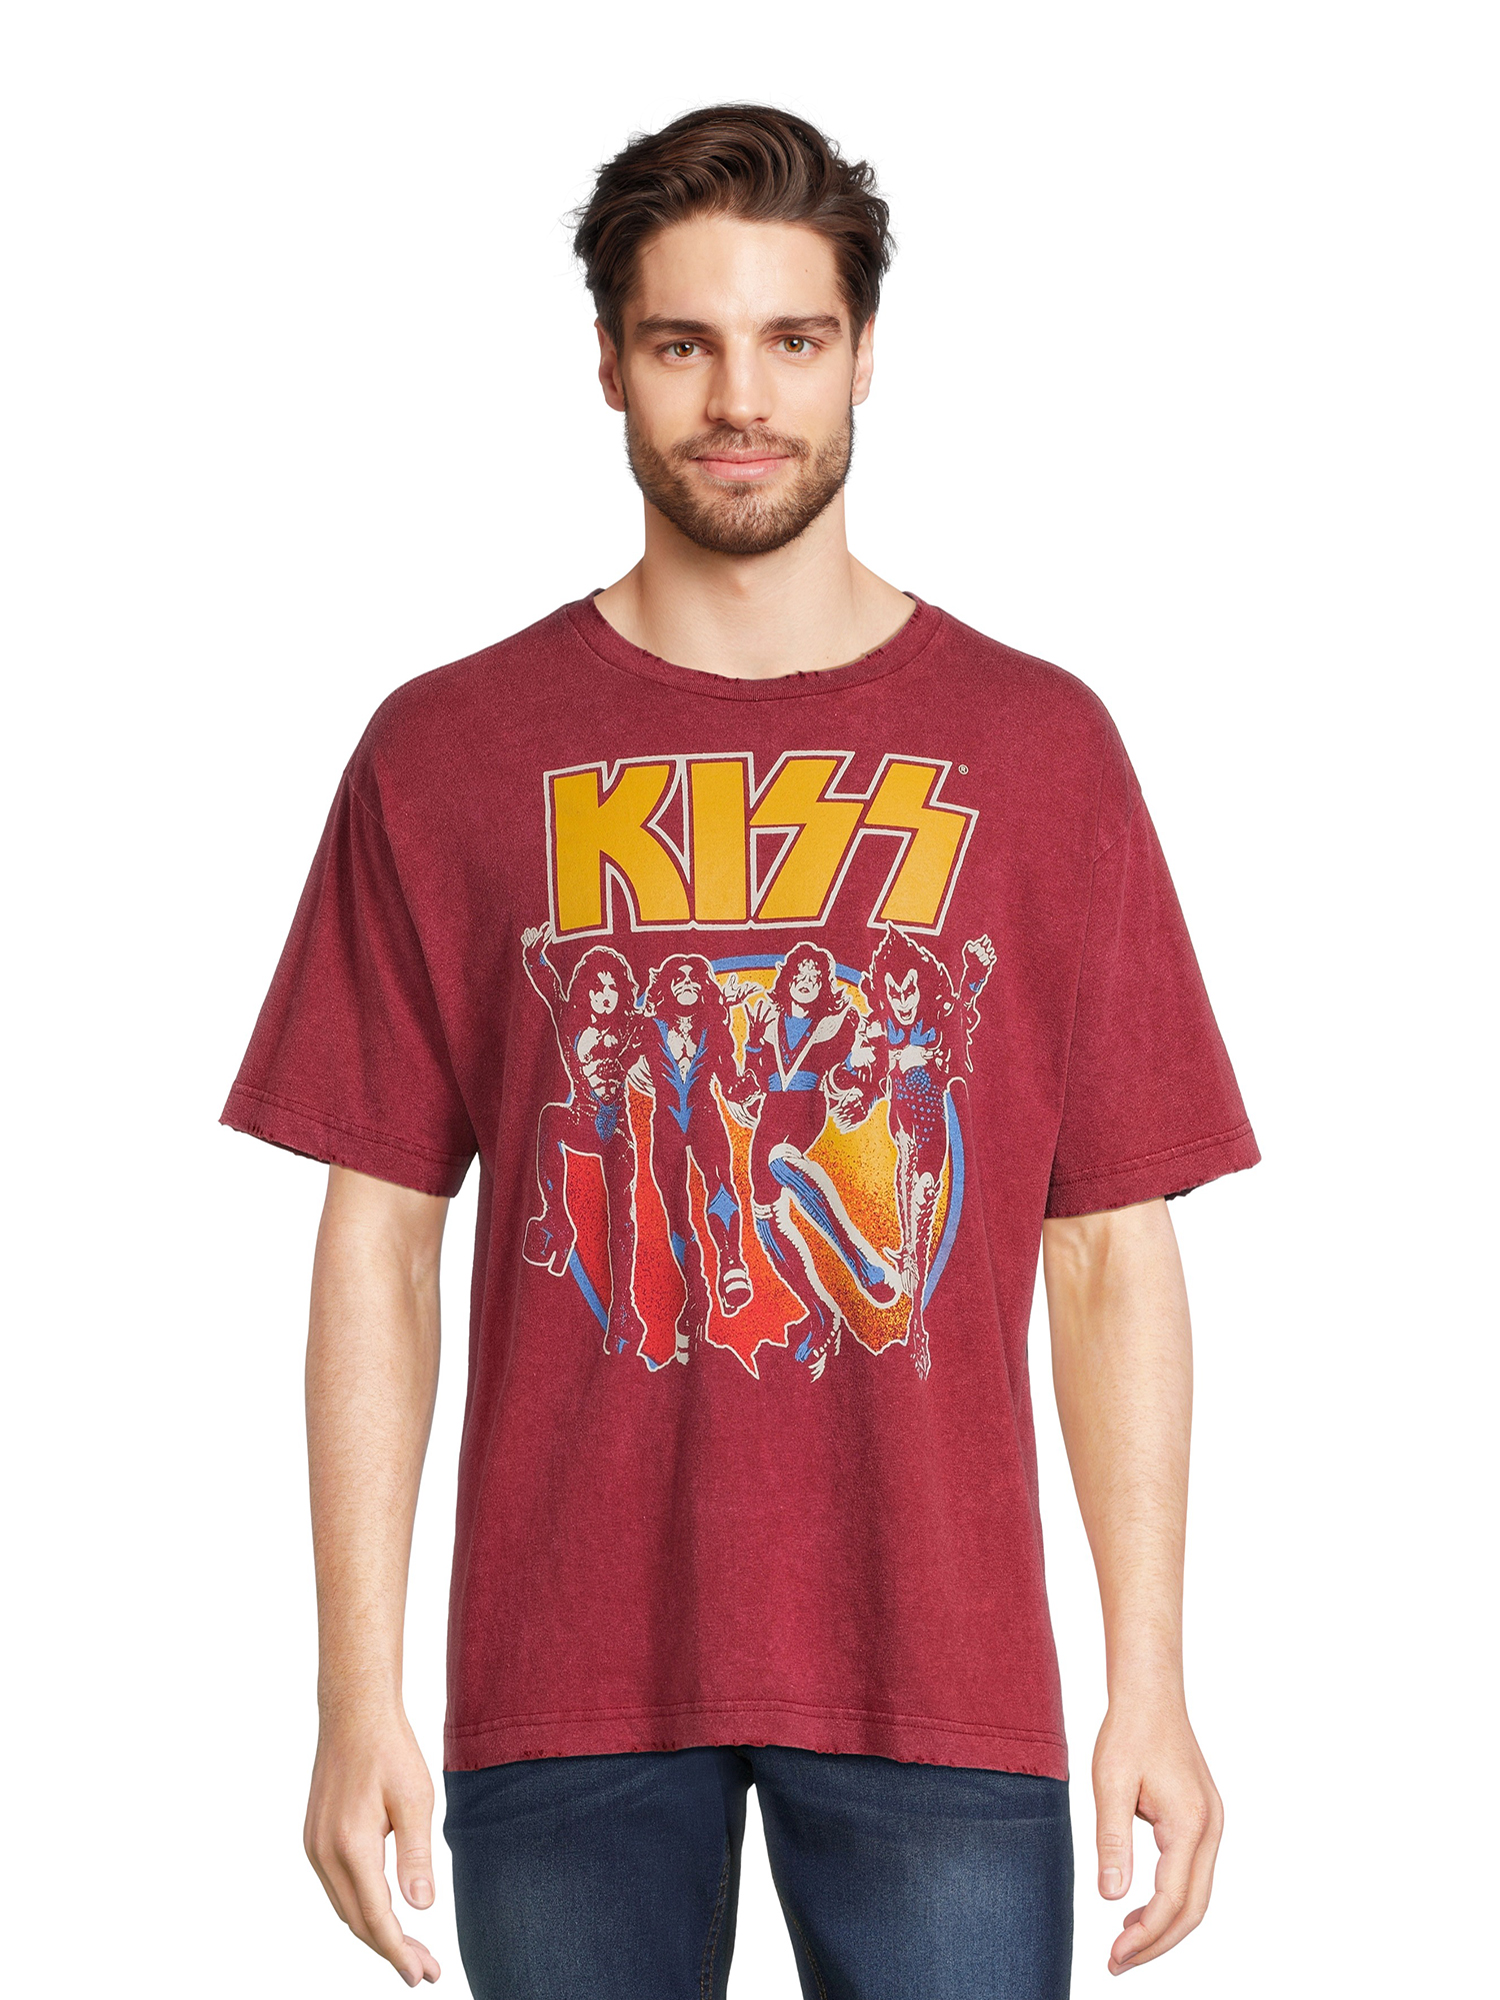 Kiss Men's & Big Men's Greatest Hits Graphic Band Tee, Size Xs-3xl, Size: 2XL, Red